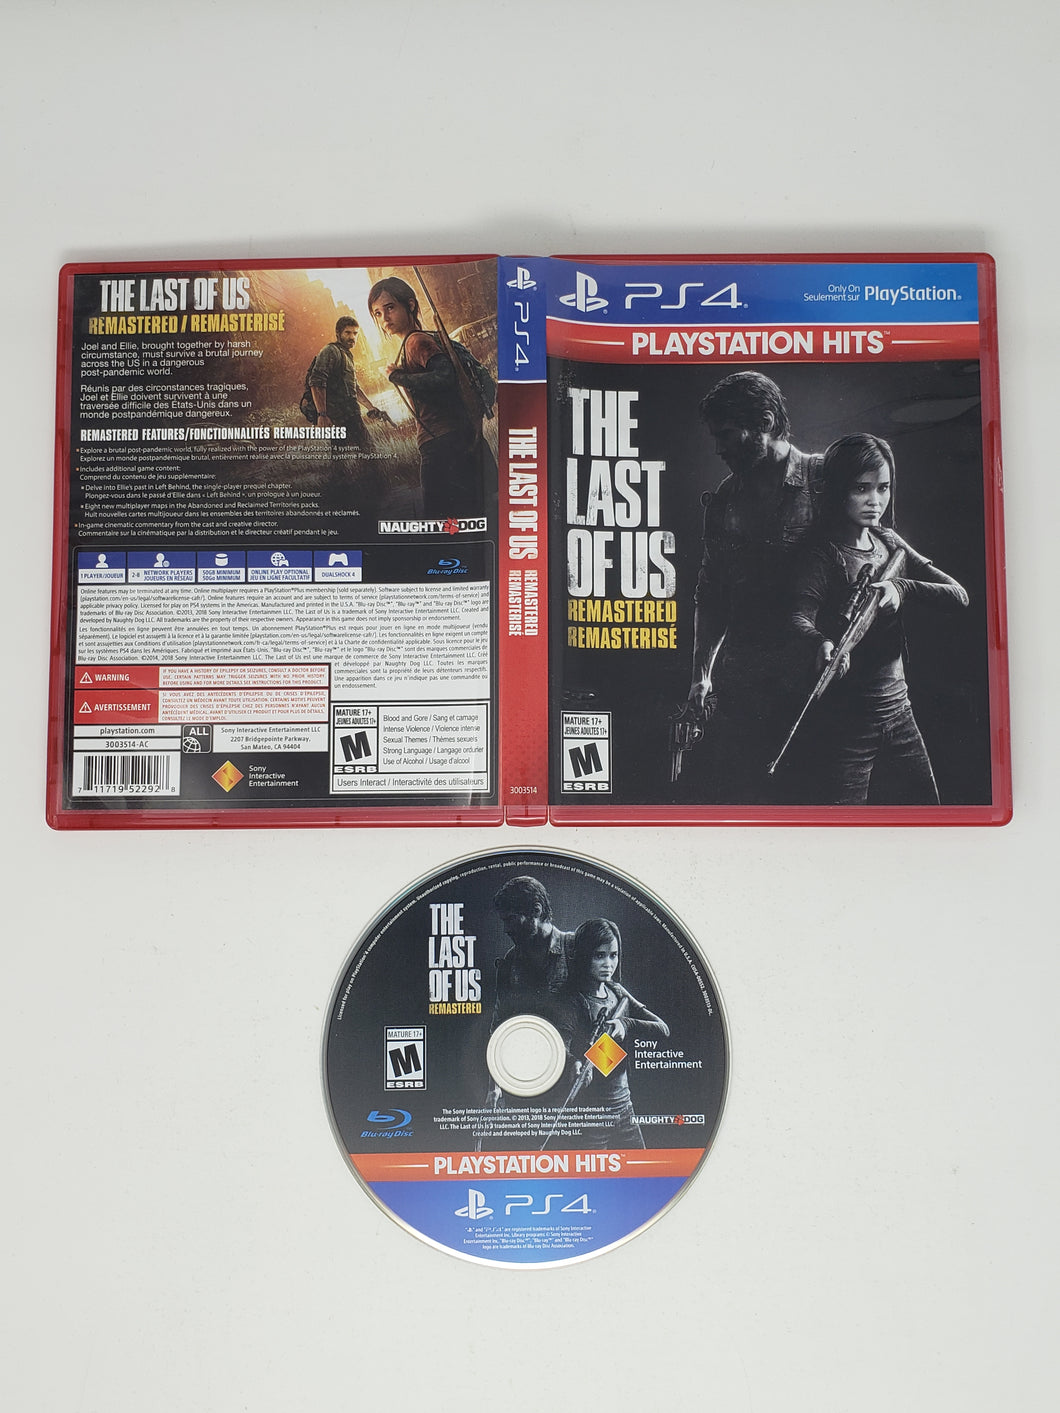 The Last of Us Remastered [Playstation Hits] - Sony Playstation 4 | PS4